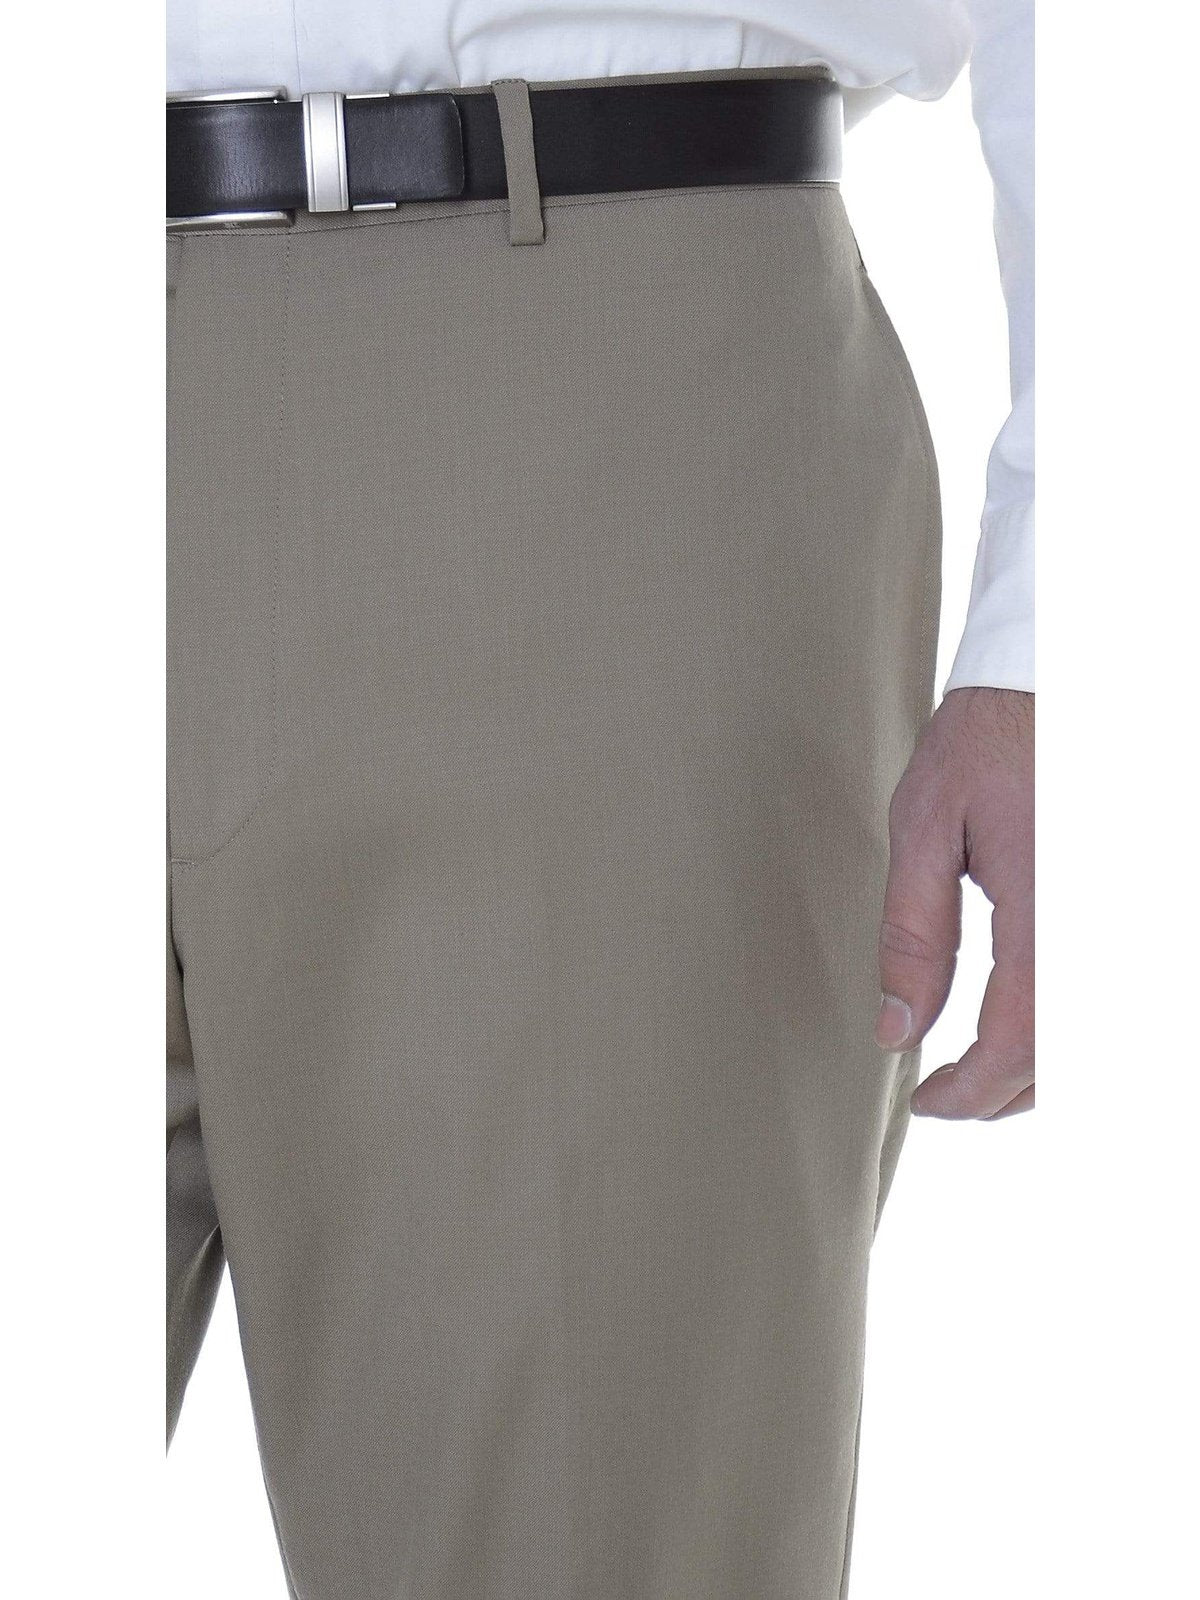 Tommy Hilfiger Trim Fit Solid Khaki Tan Flat Front Worsted Wool Dress Pants - The Suit Depot